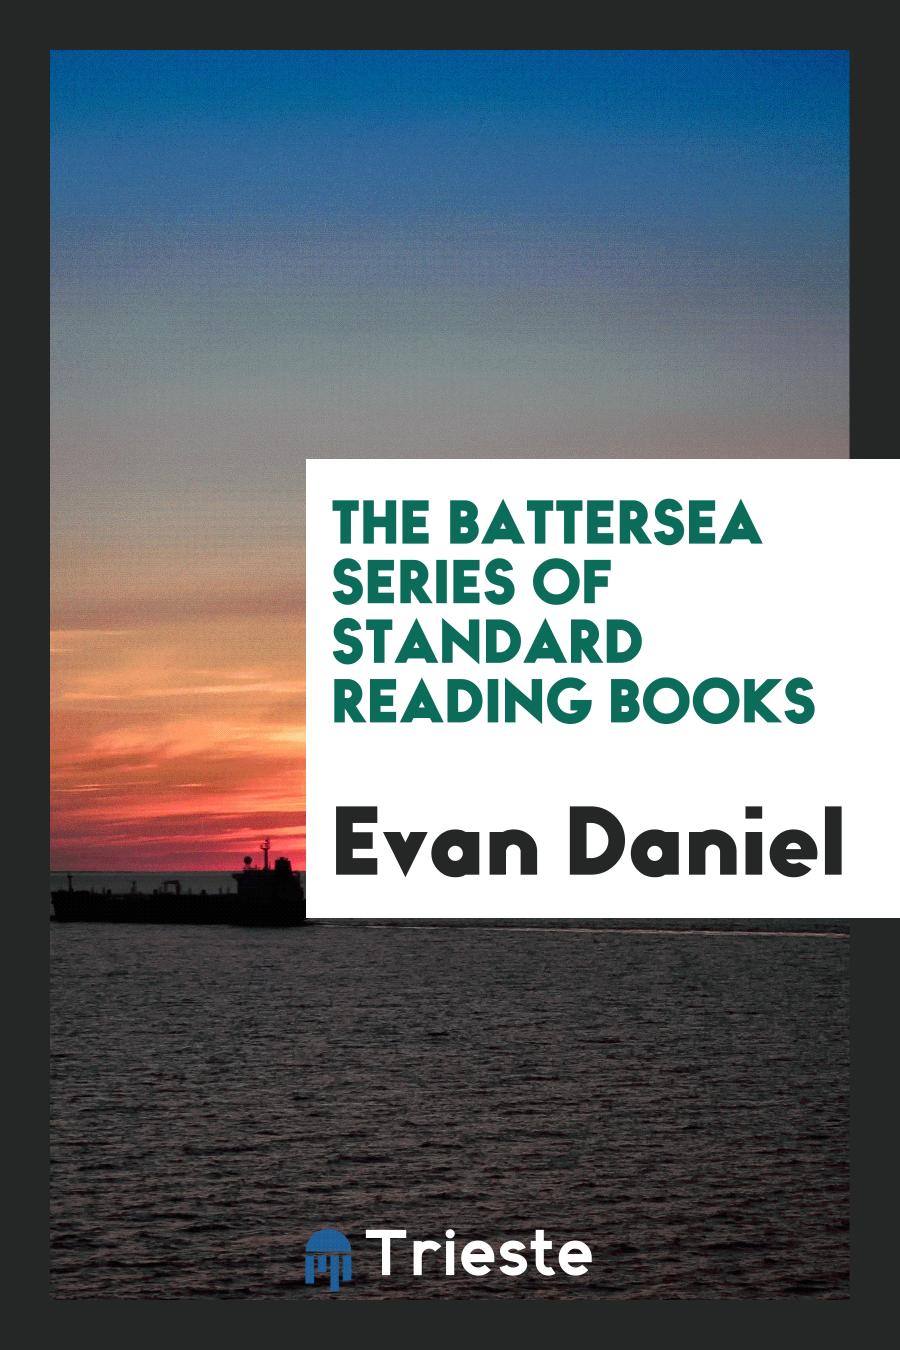 The Battersea series of standard reading books